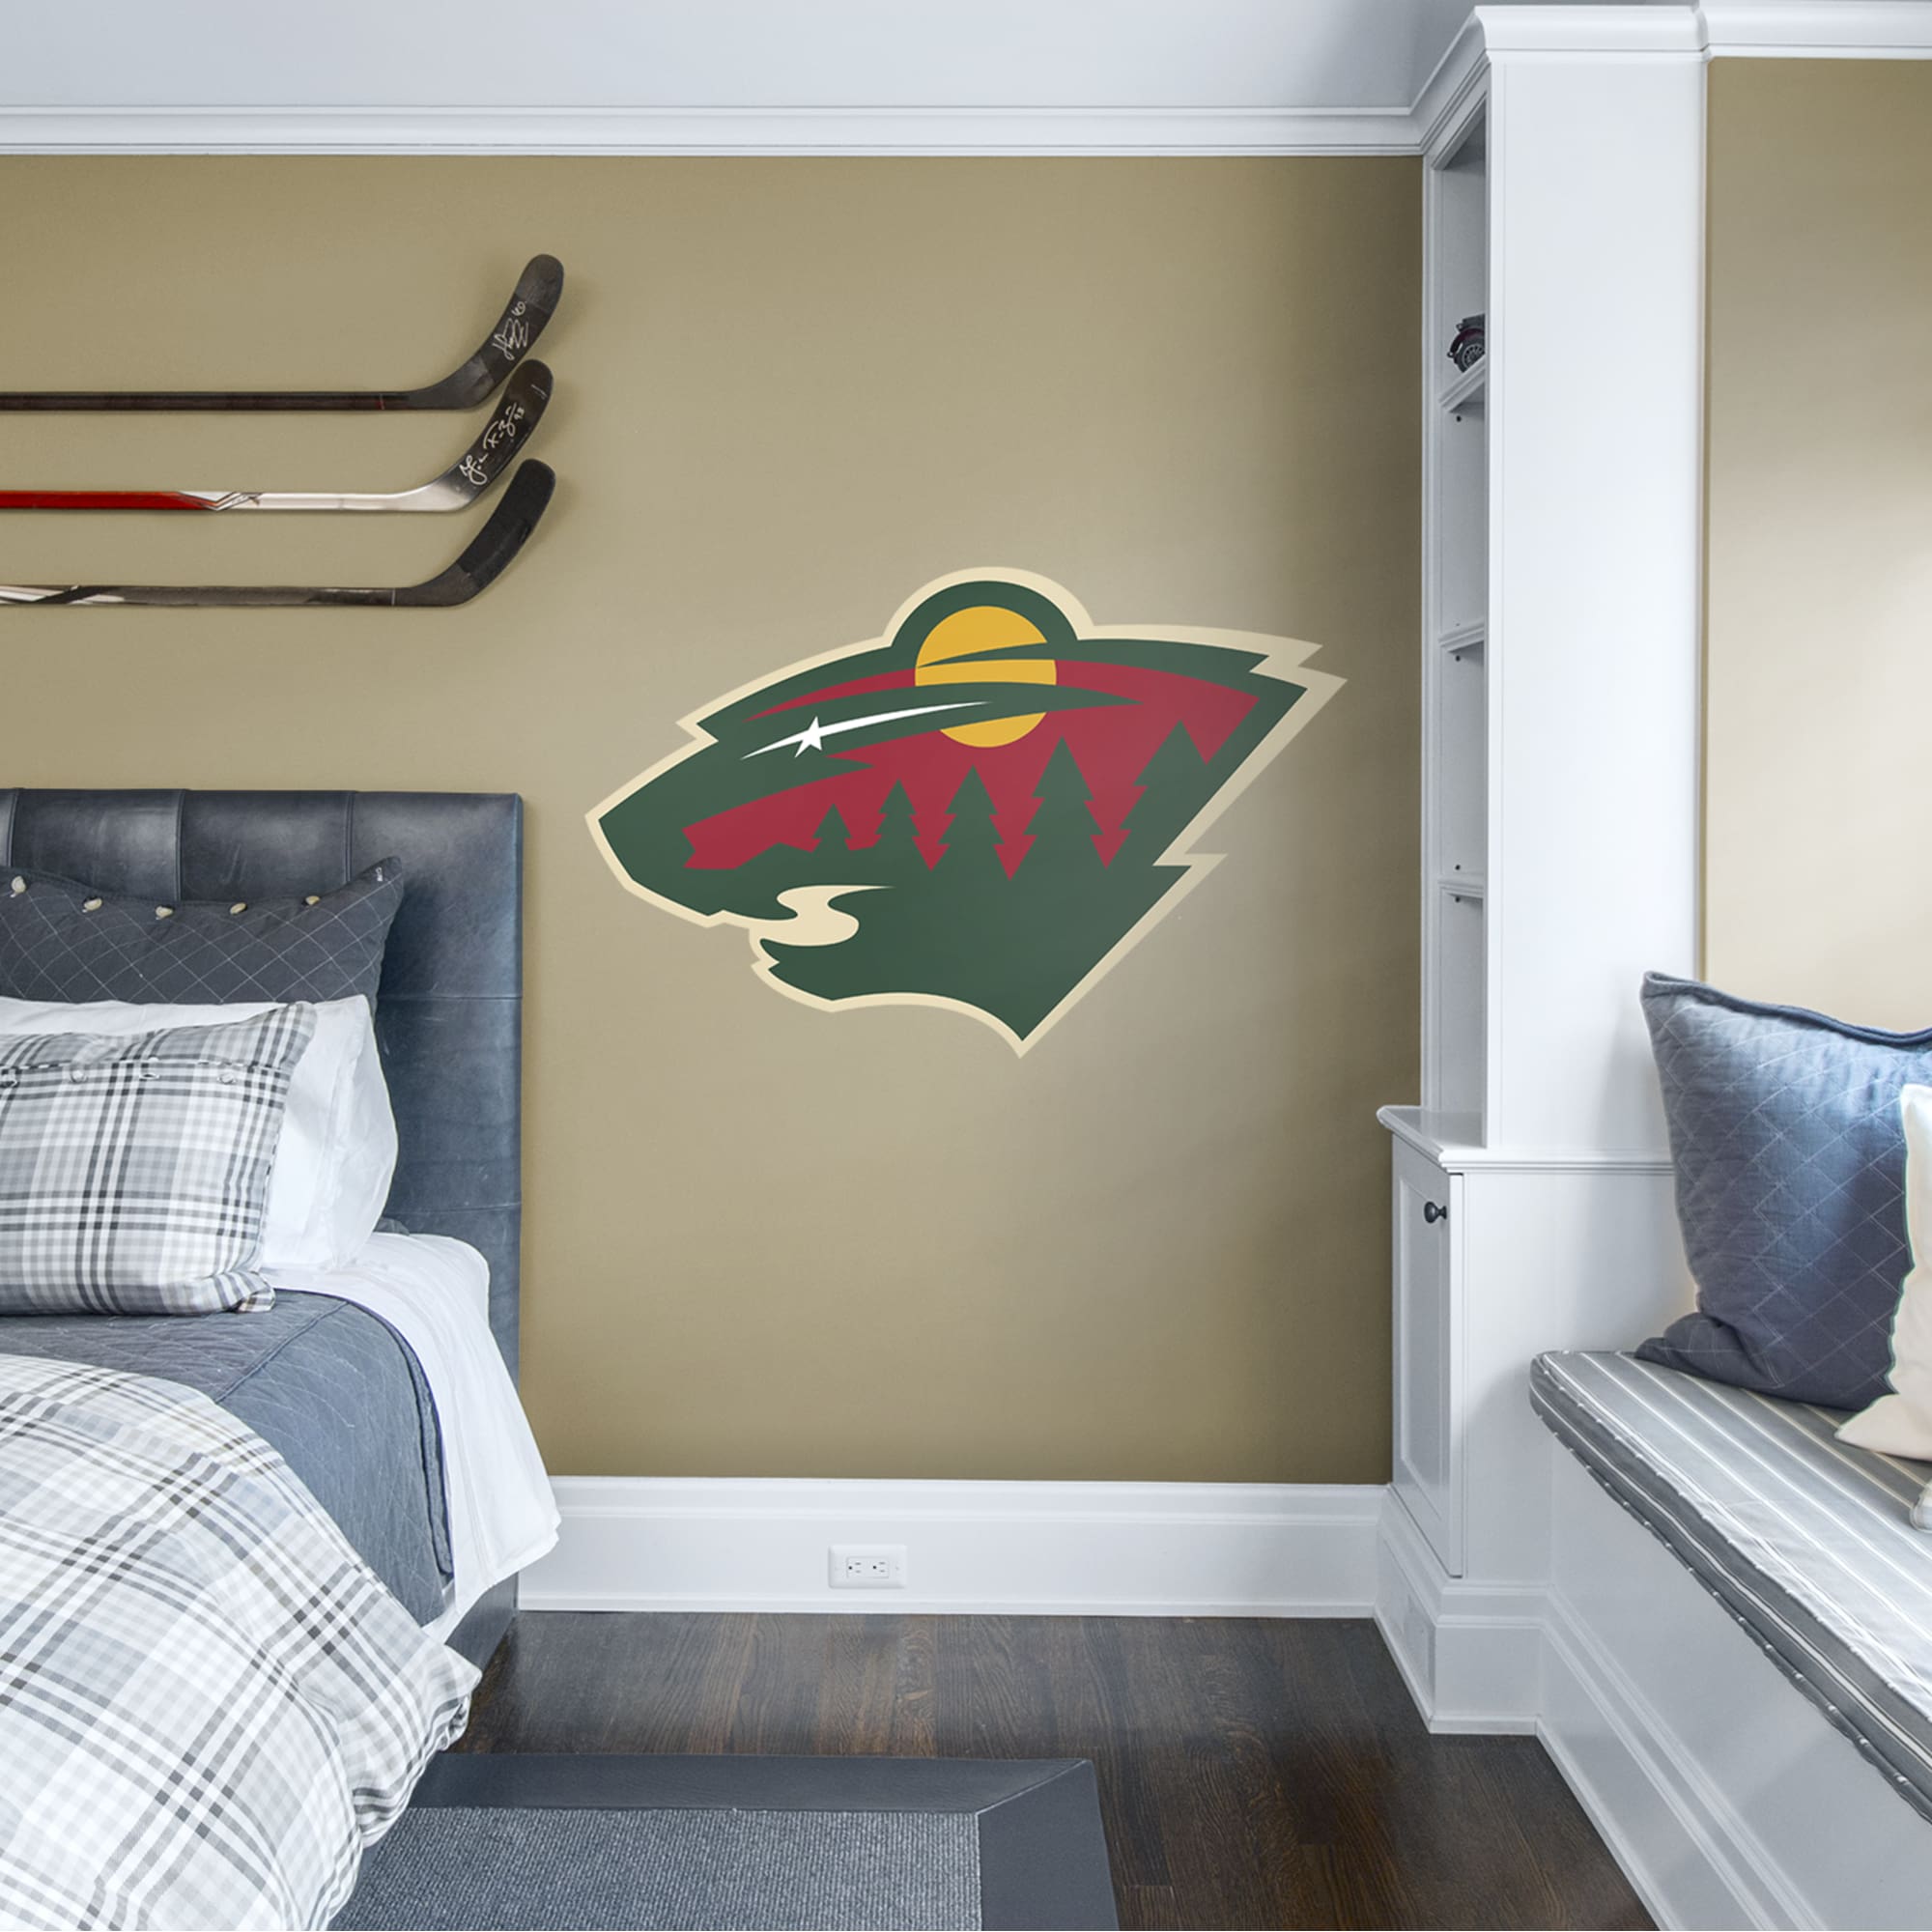 Minnesota Wild: Logo - Officially Licensed NHL Removable Wall Decal Giant Logo (51"W x 33"H) by Fathead | Vinyl